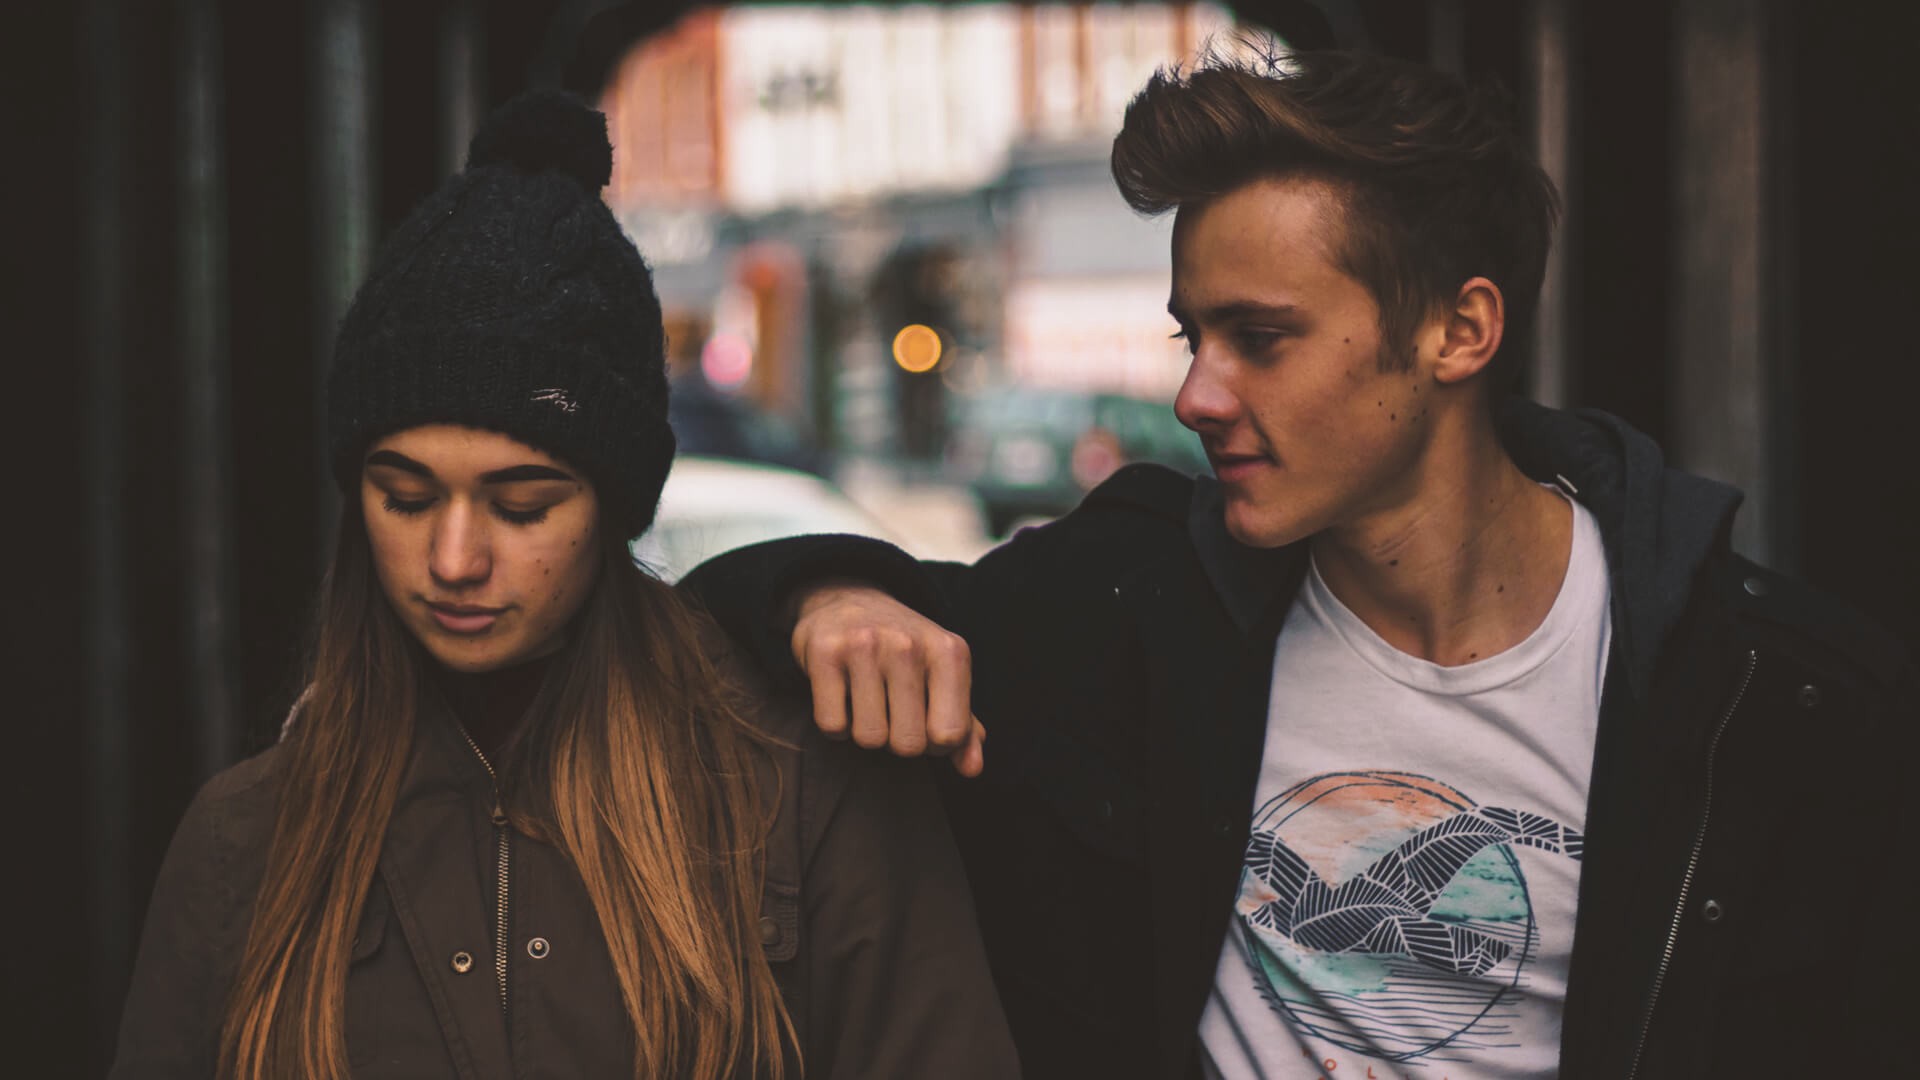 Three Lessons About Bad Dating Advice While in the “Friend Zone”.